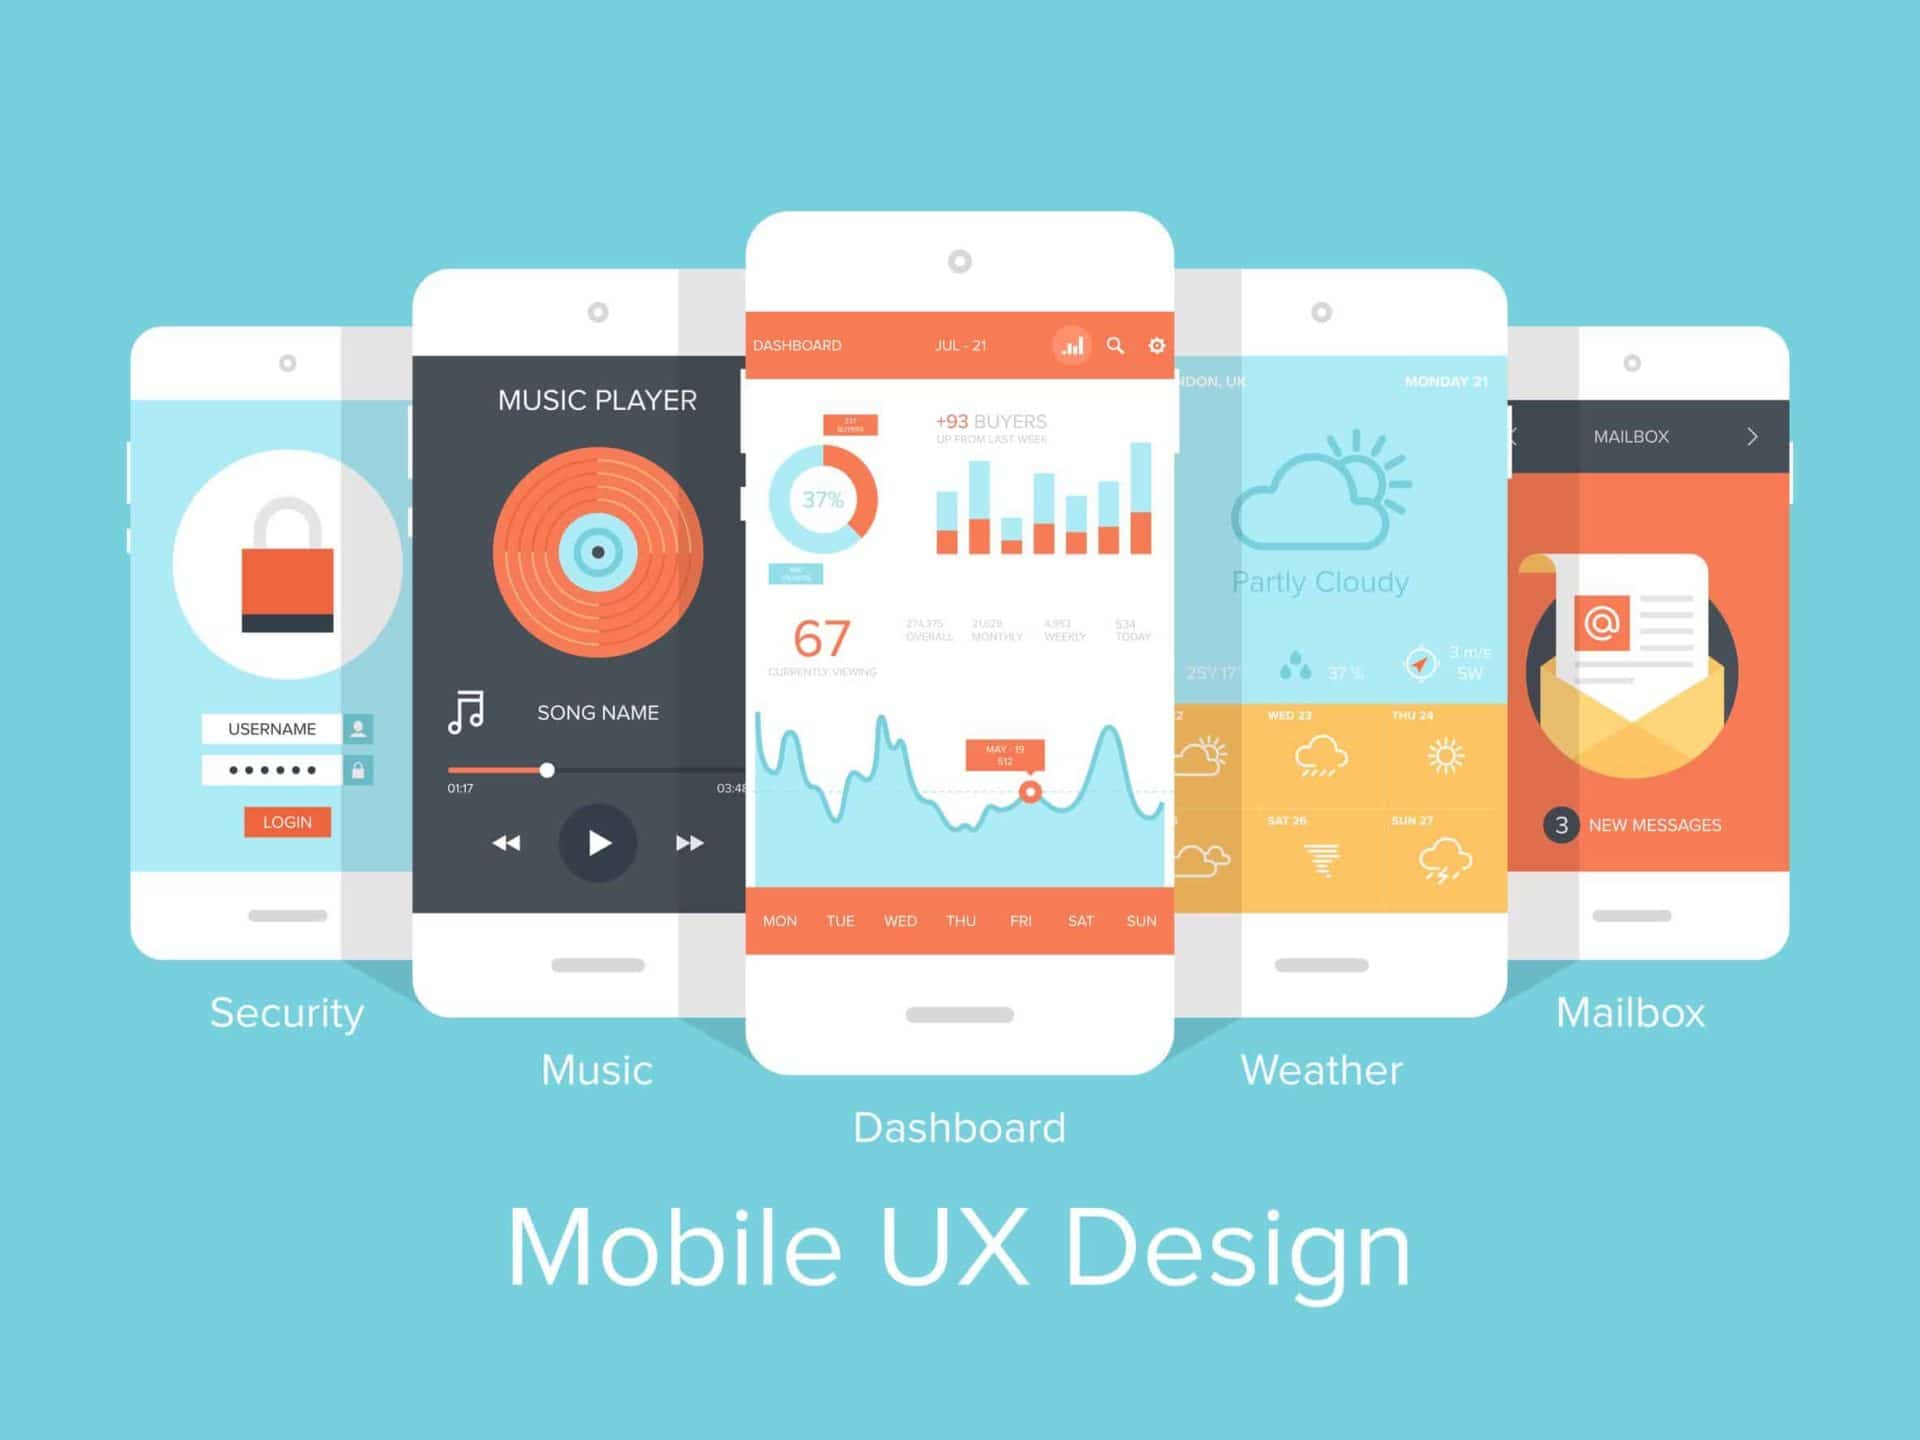 Mobile User Experience (UX)